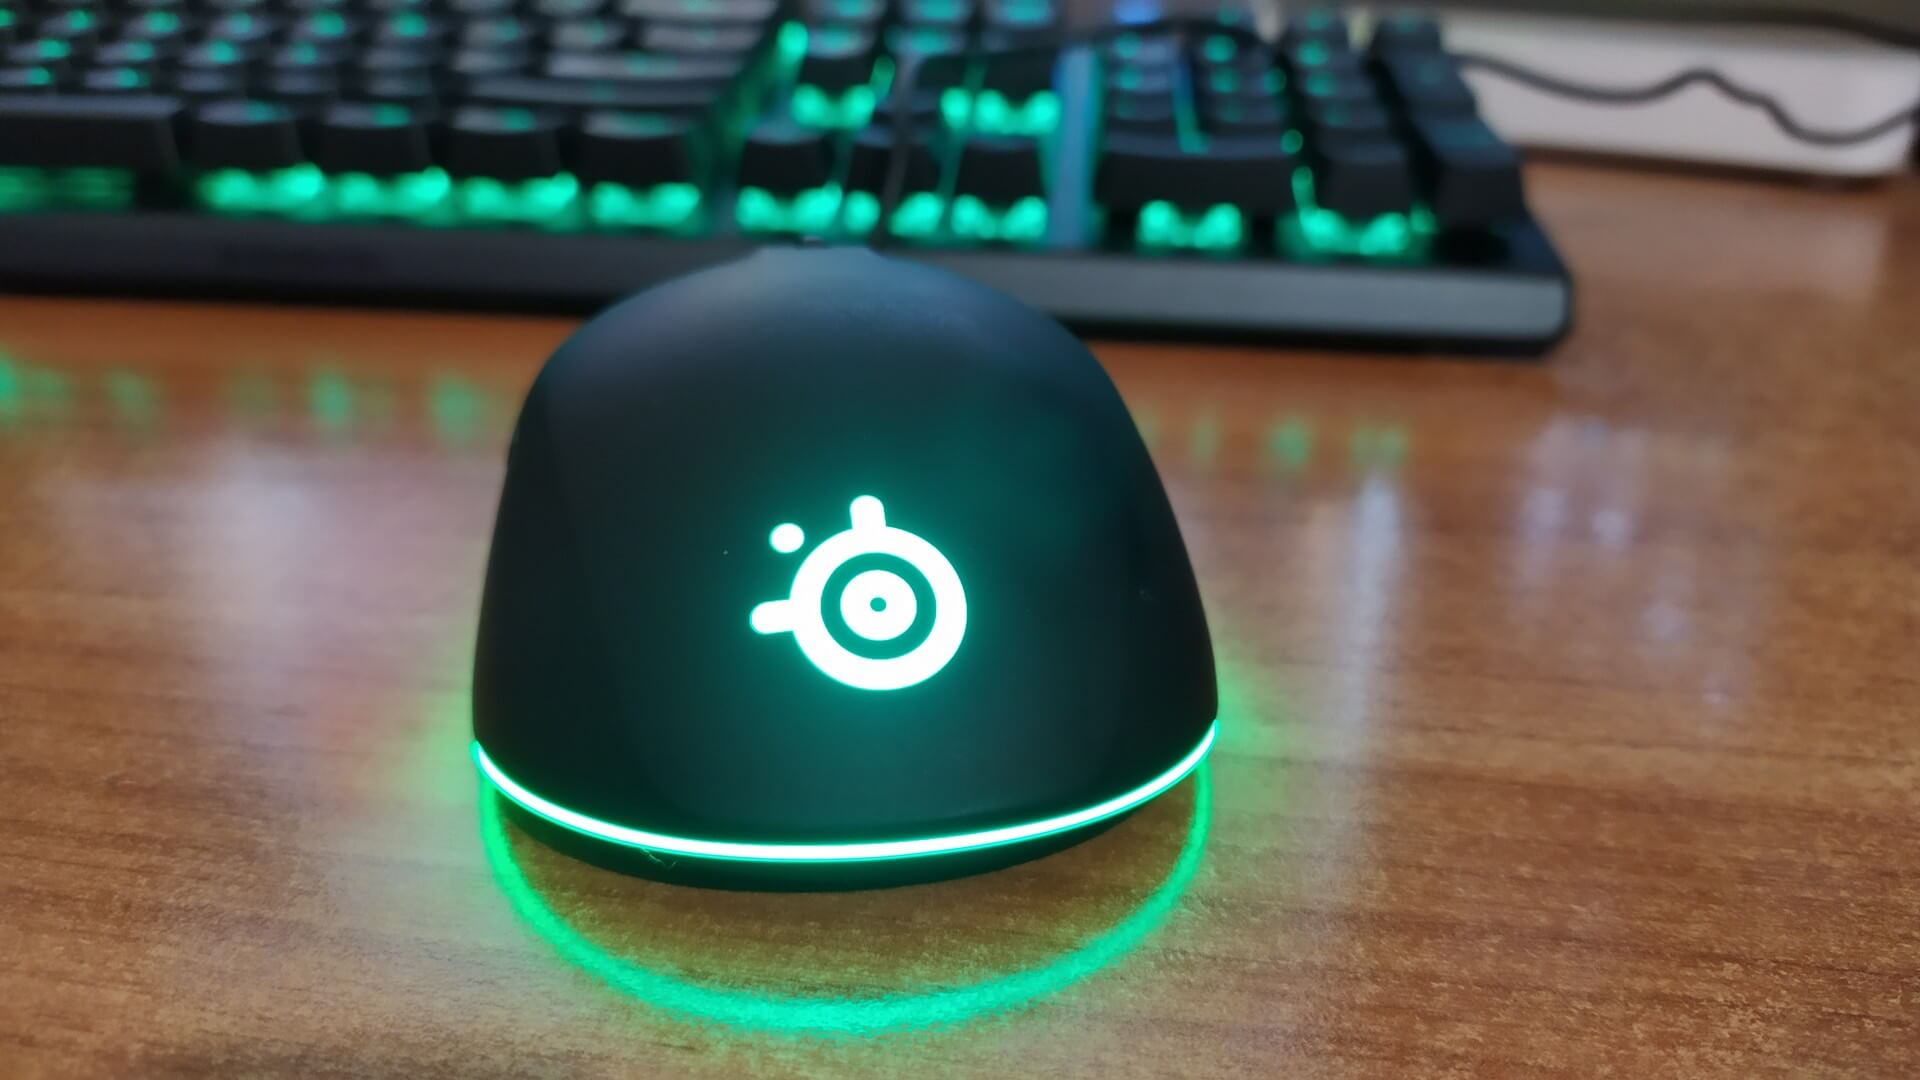 SteelSeries Rival 3 - Review